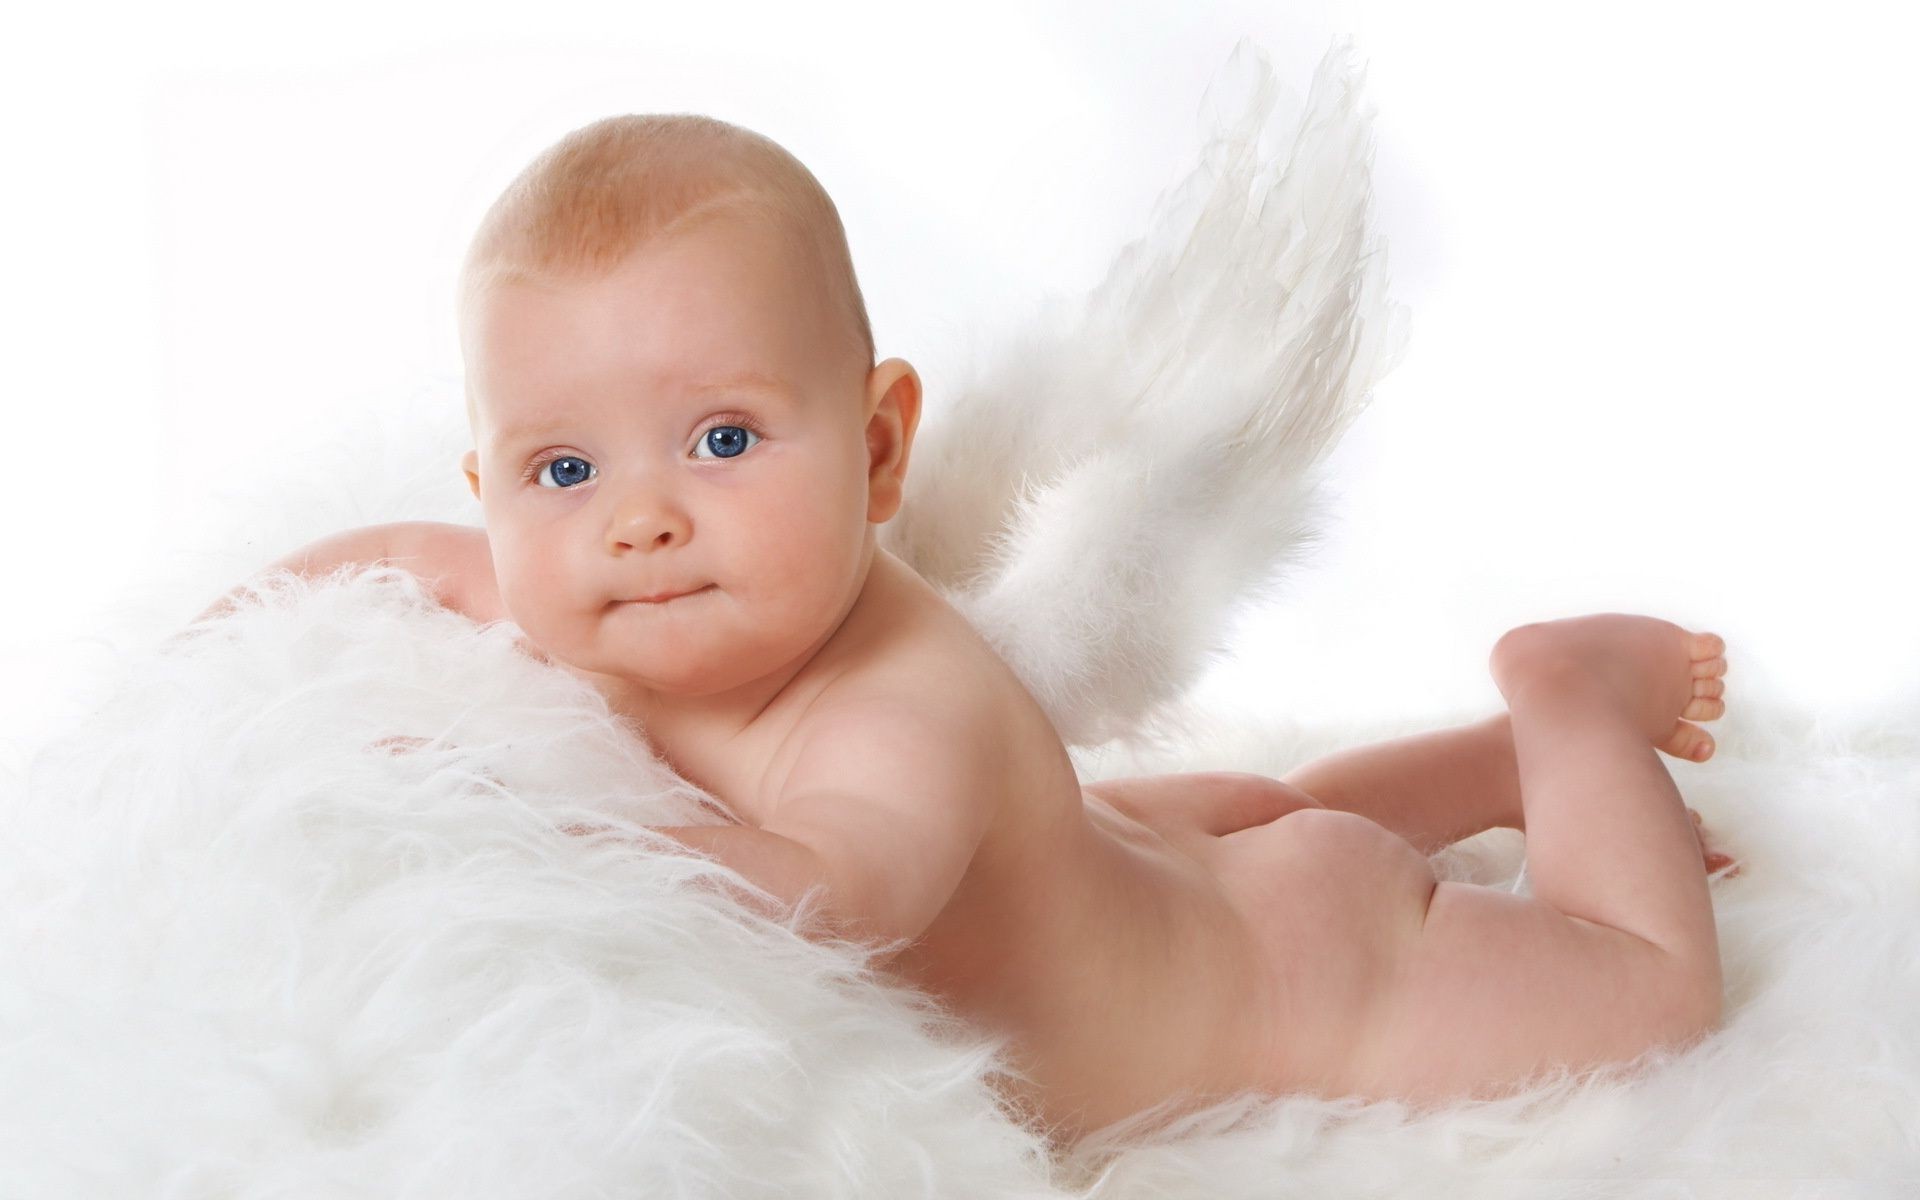 1920x1200 Angels child baby innocence little cute nude precious fun HD wallpaper.  Android wallpapers for free.